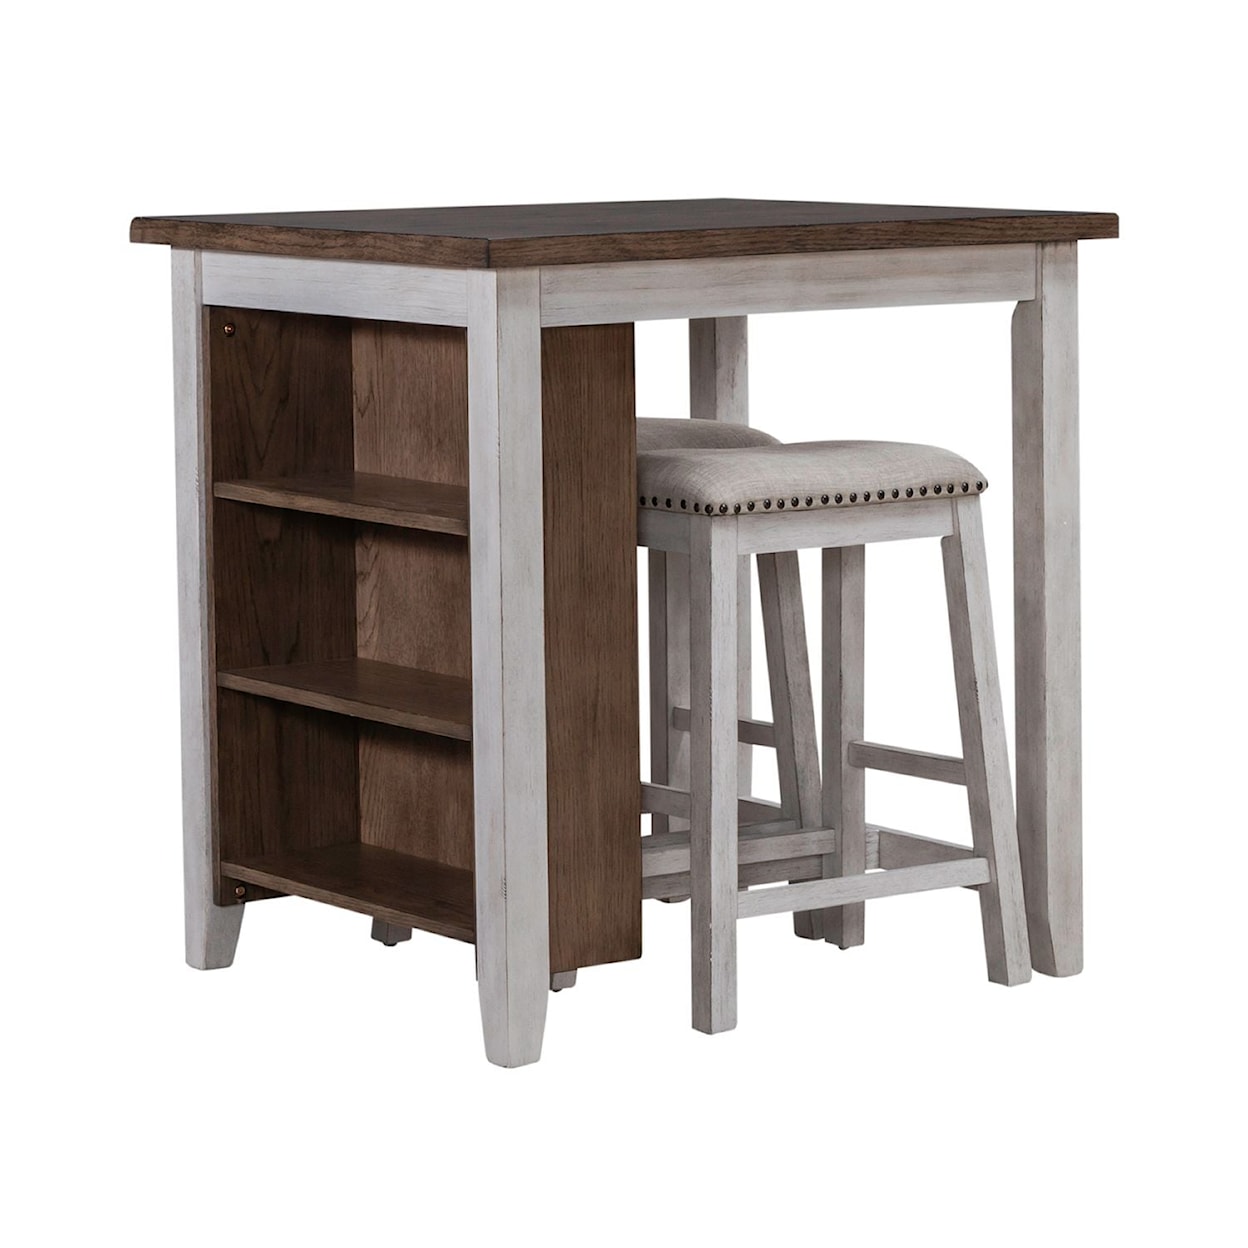 Libby Brook Creek 3-Piece Counter Set - Two-Tone